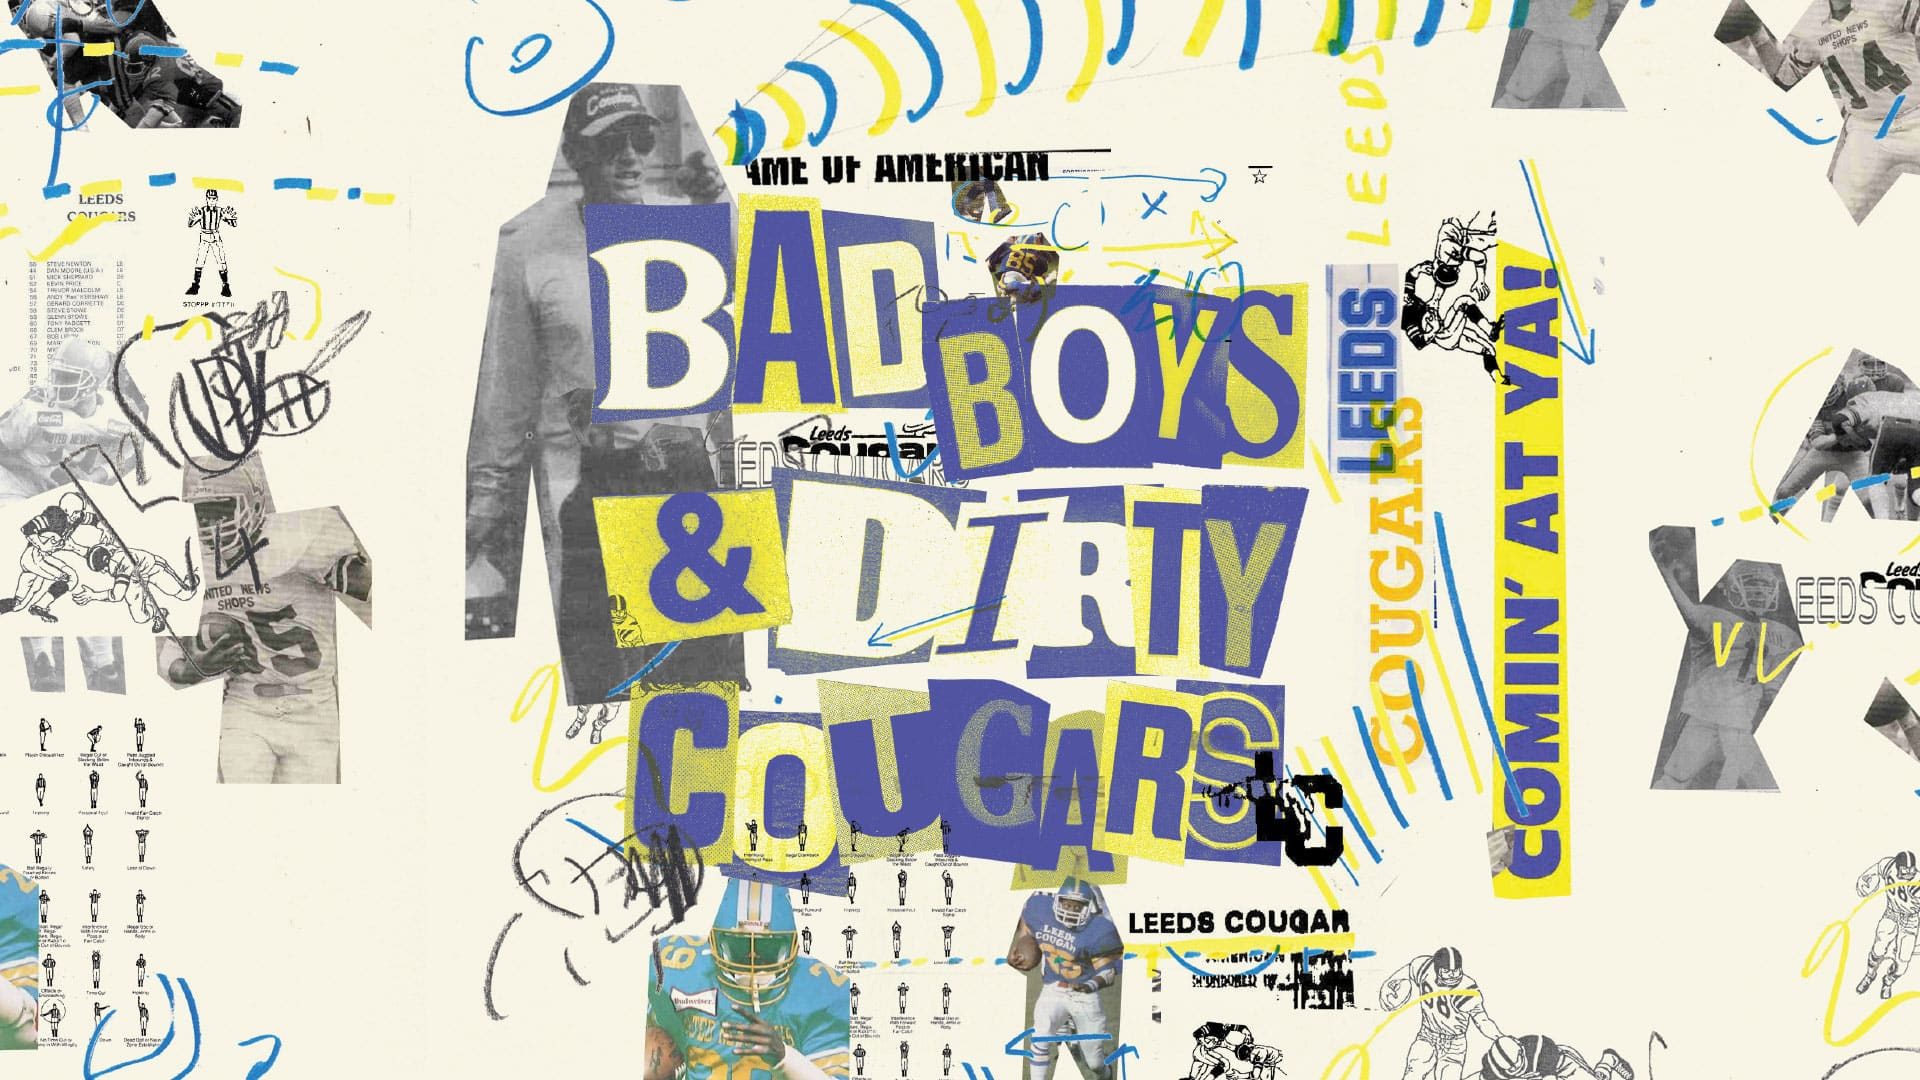 A scrapbook style collage of images of Leeds Cougars American football players, with the headline 'Bad Boys and Dirty Cougars' and the slogan 'Comin' at ya!'